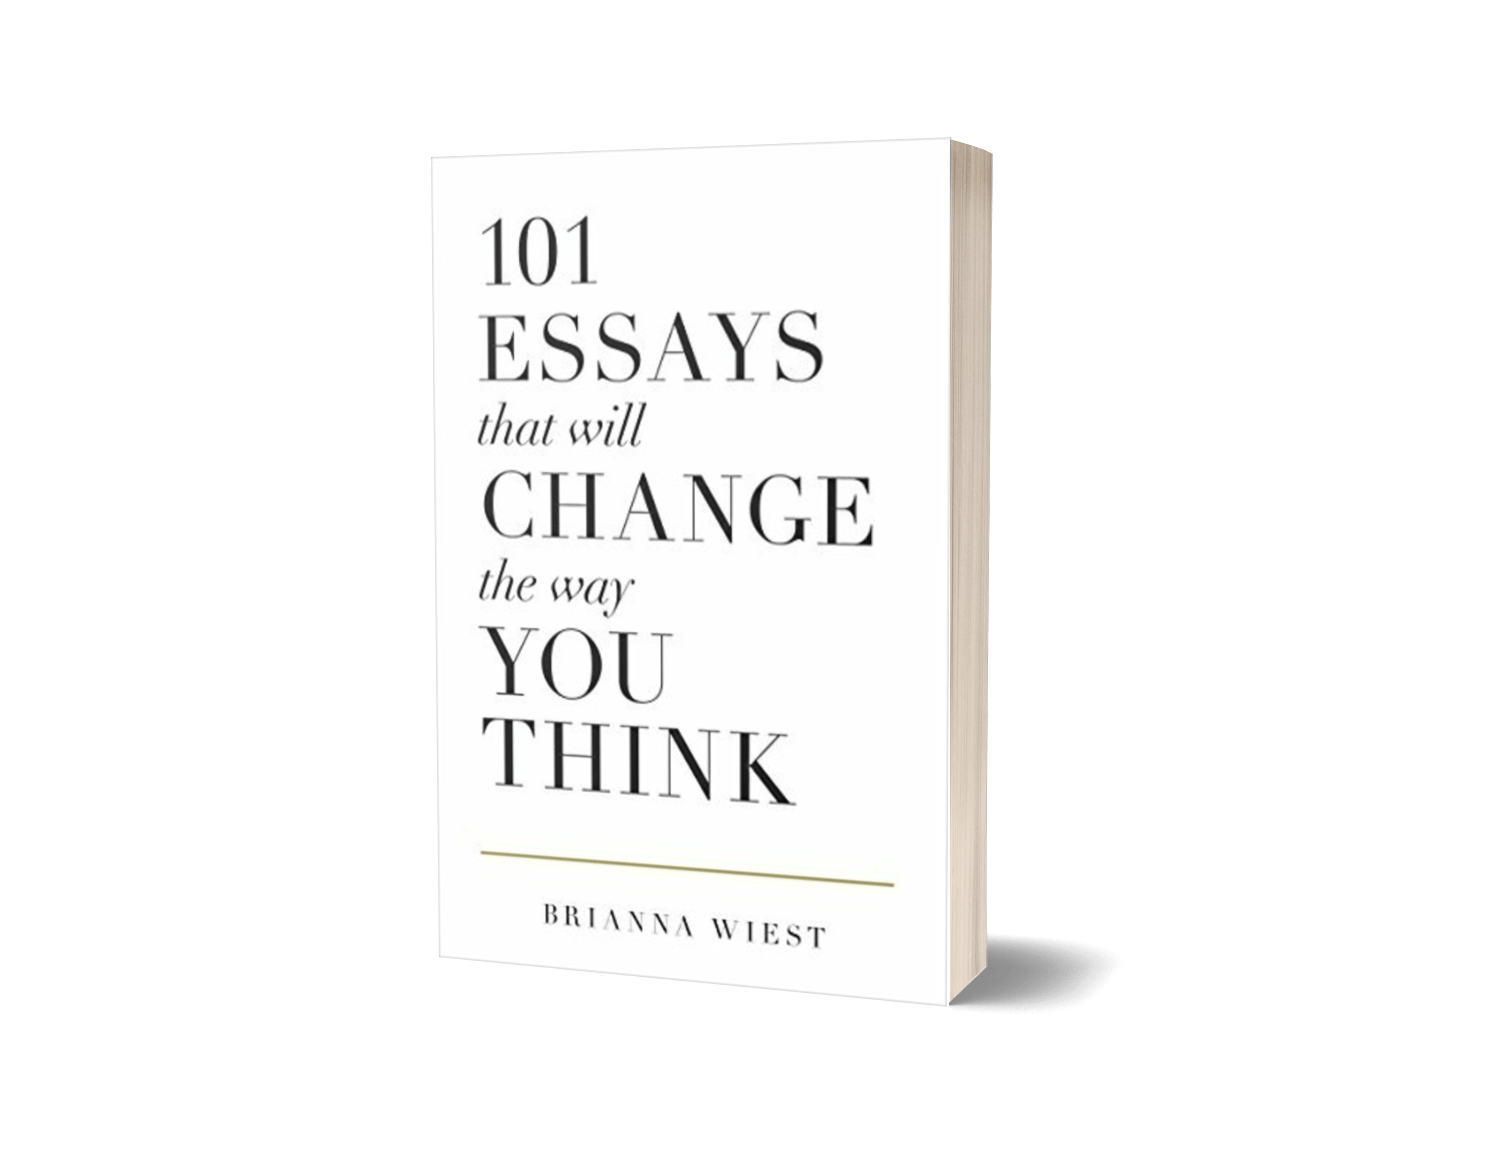 101 Essays that will change the way you think by Brianna Wirest